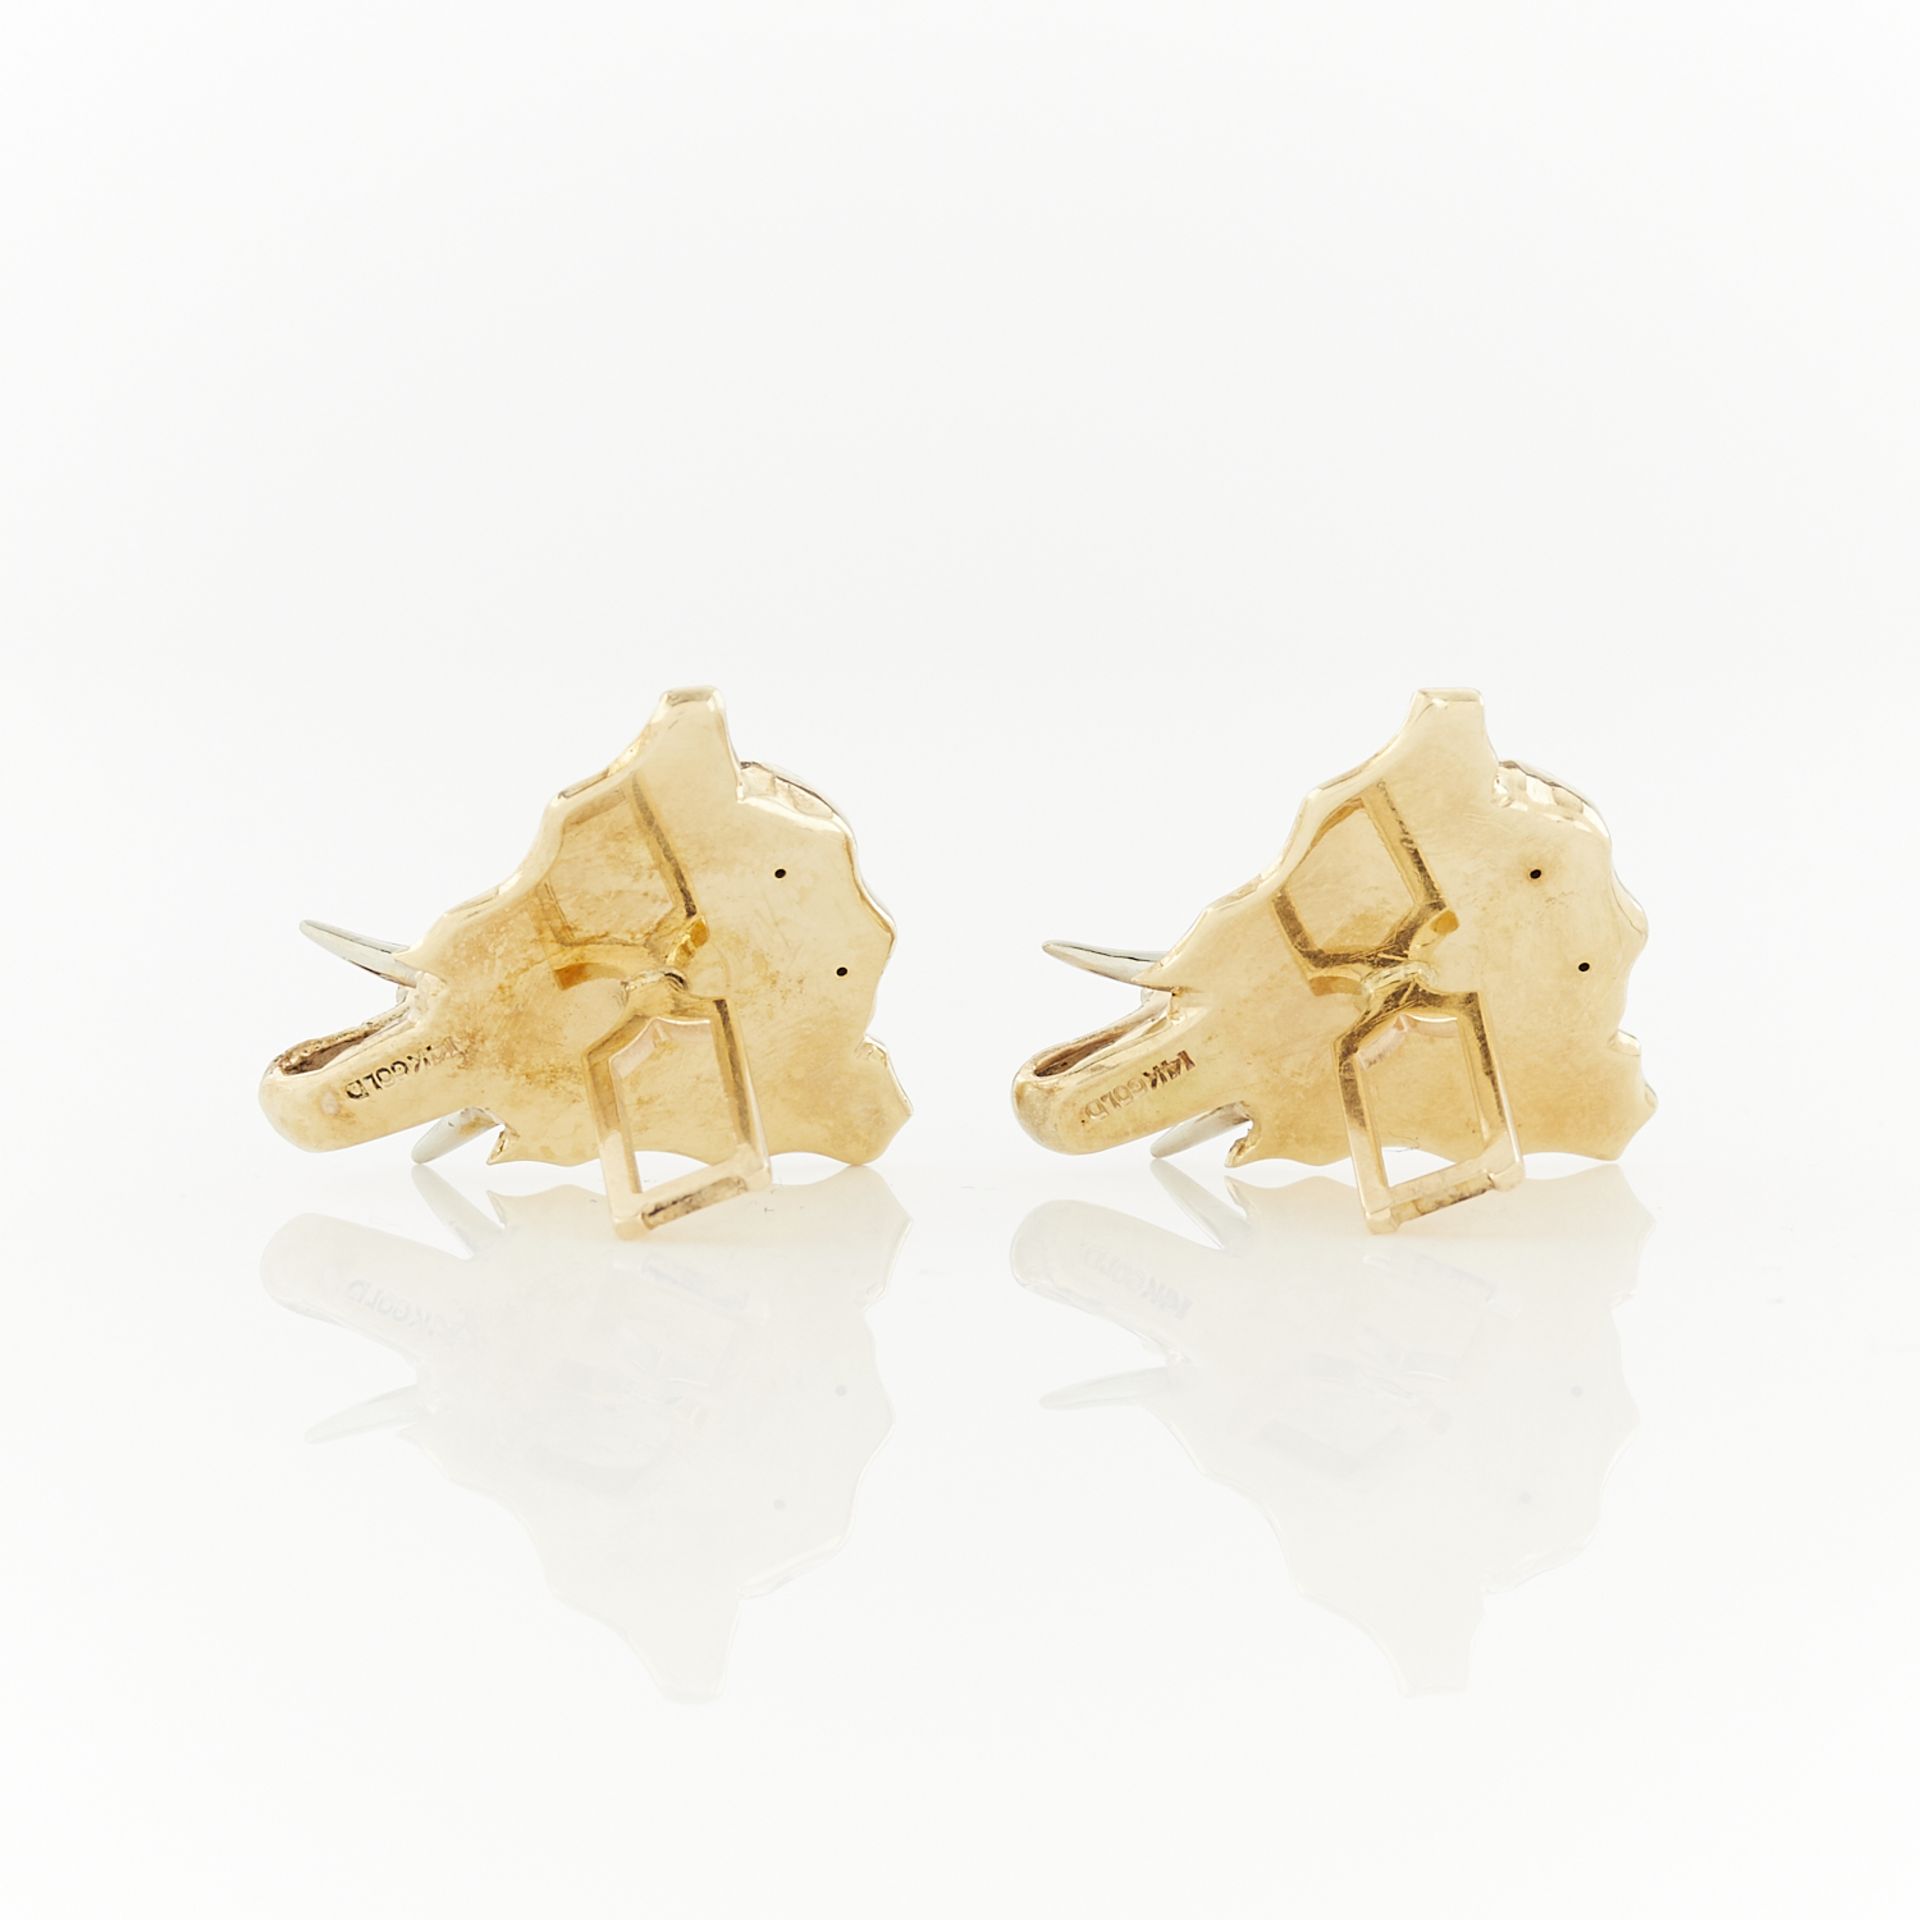 Pair of 14k Elephant Cuff Links - Image 8 of 9